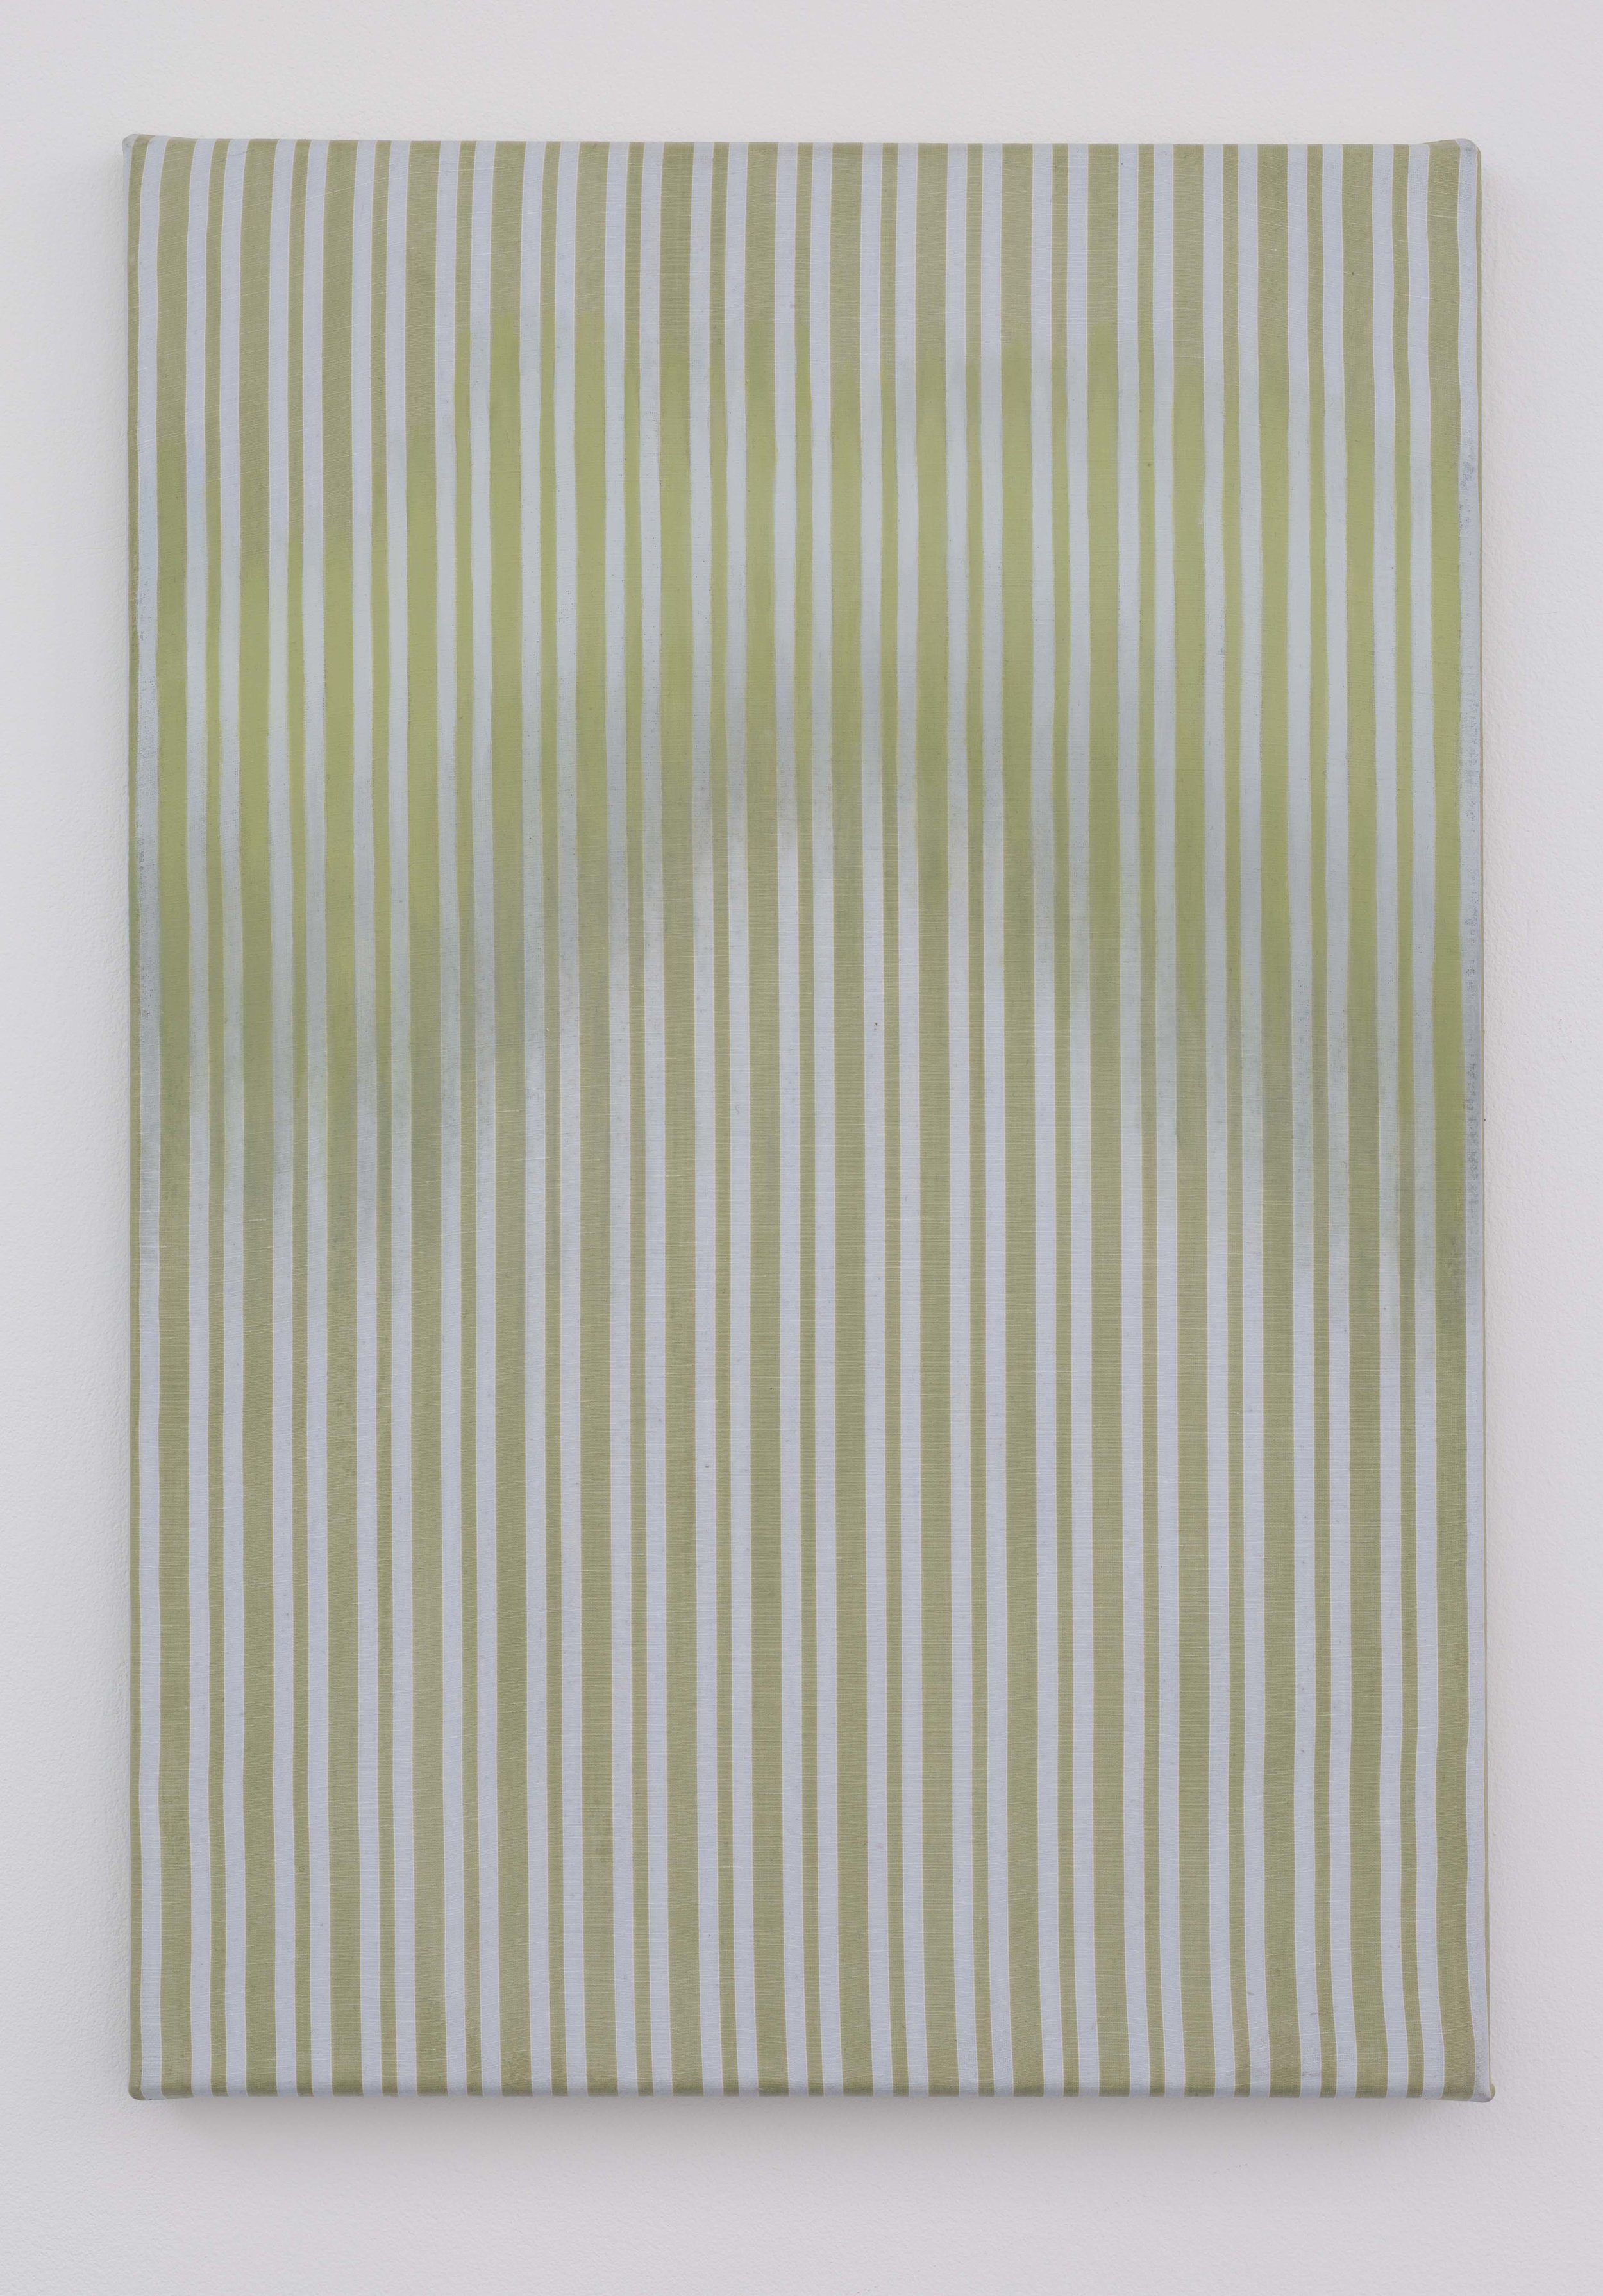   Across, Down   Oil and acrylic on striped polycotton  55 x 40cm  2017 